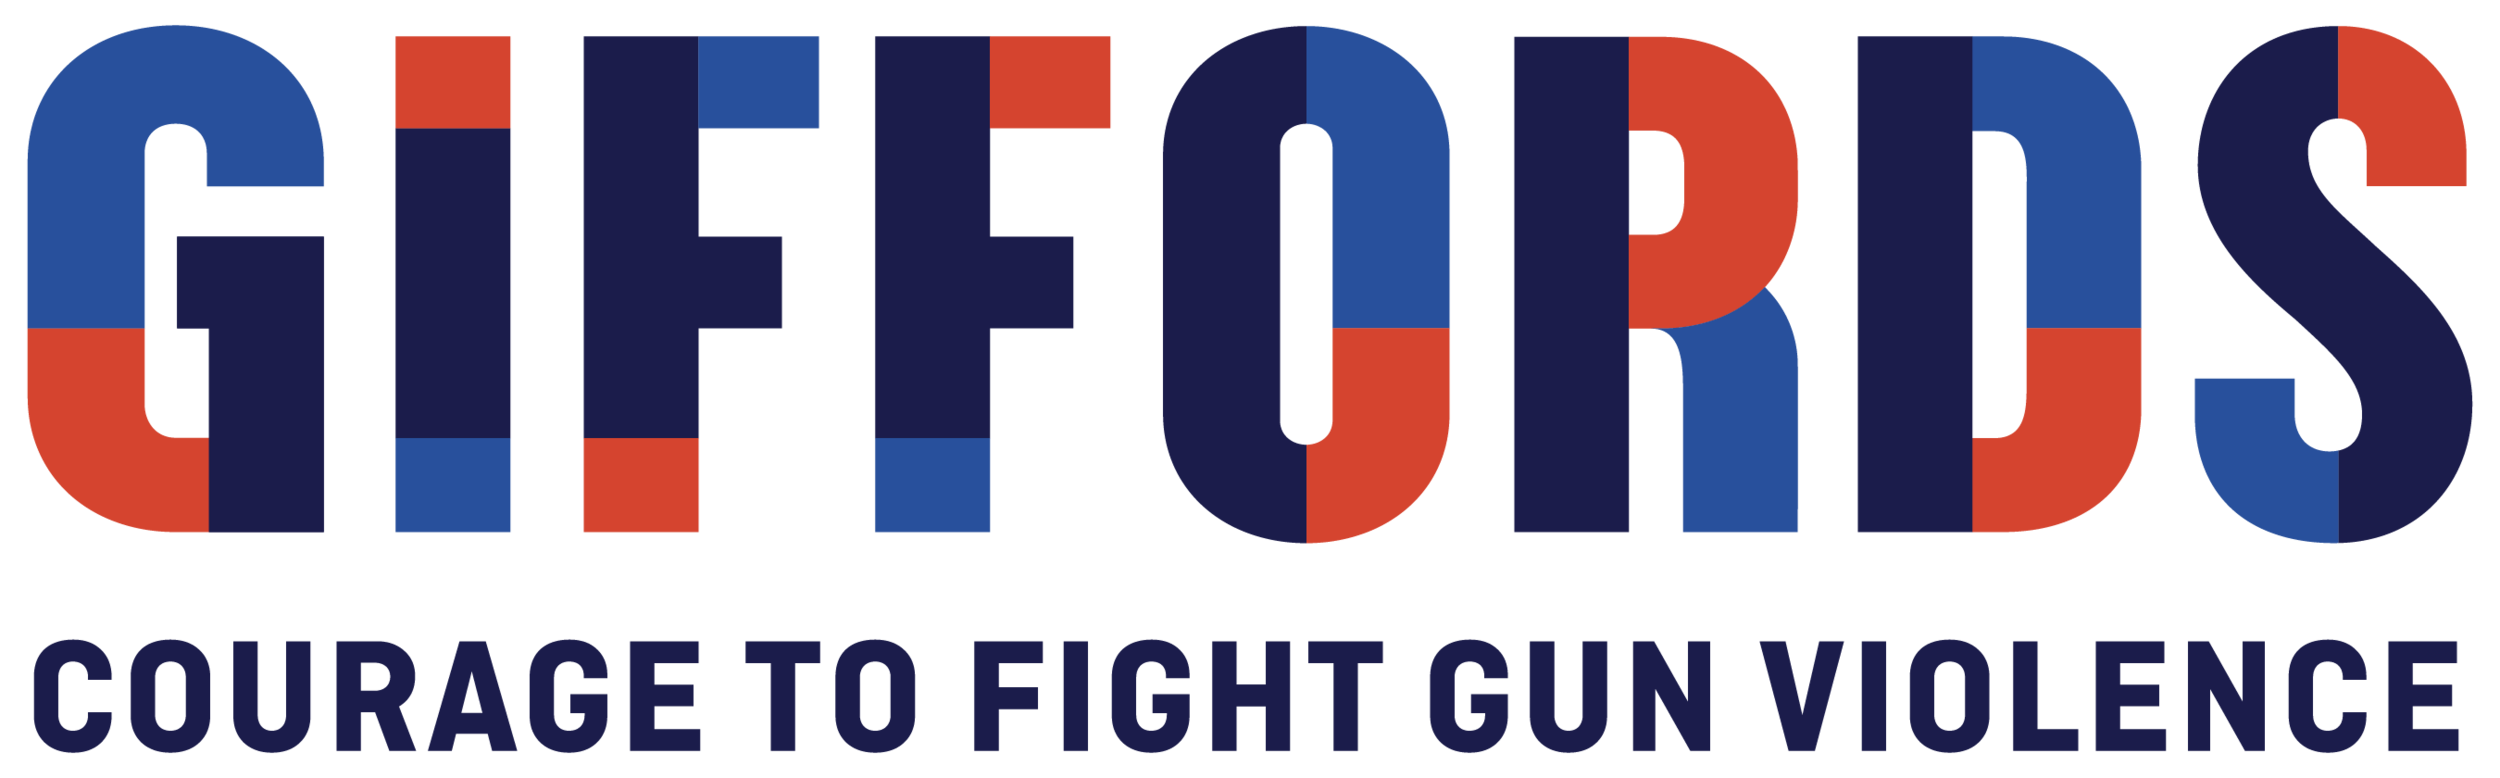 Giffords_Logo_Primary_RGB.png